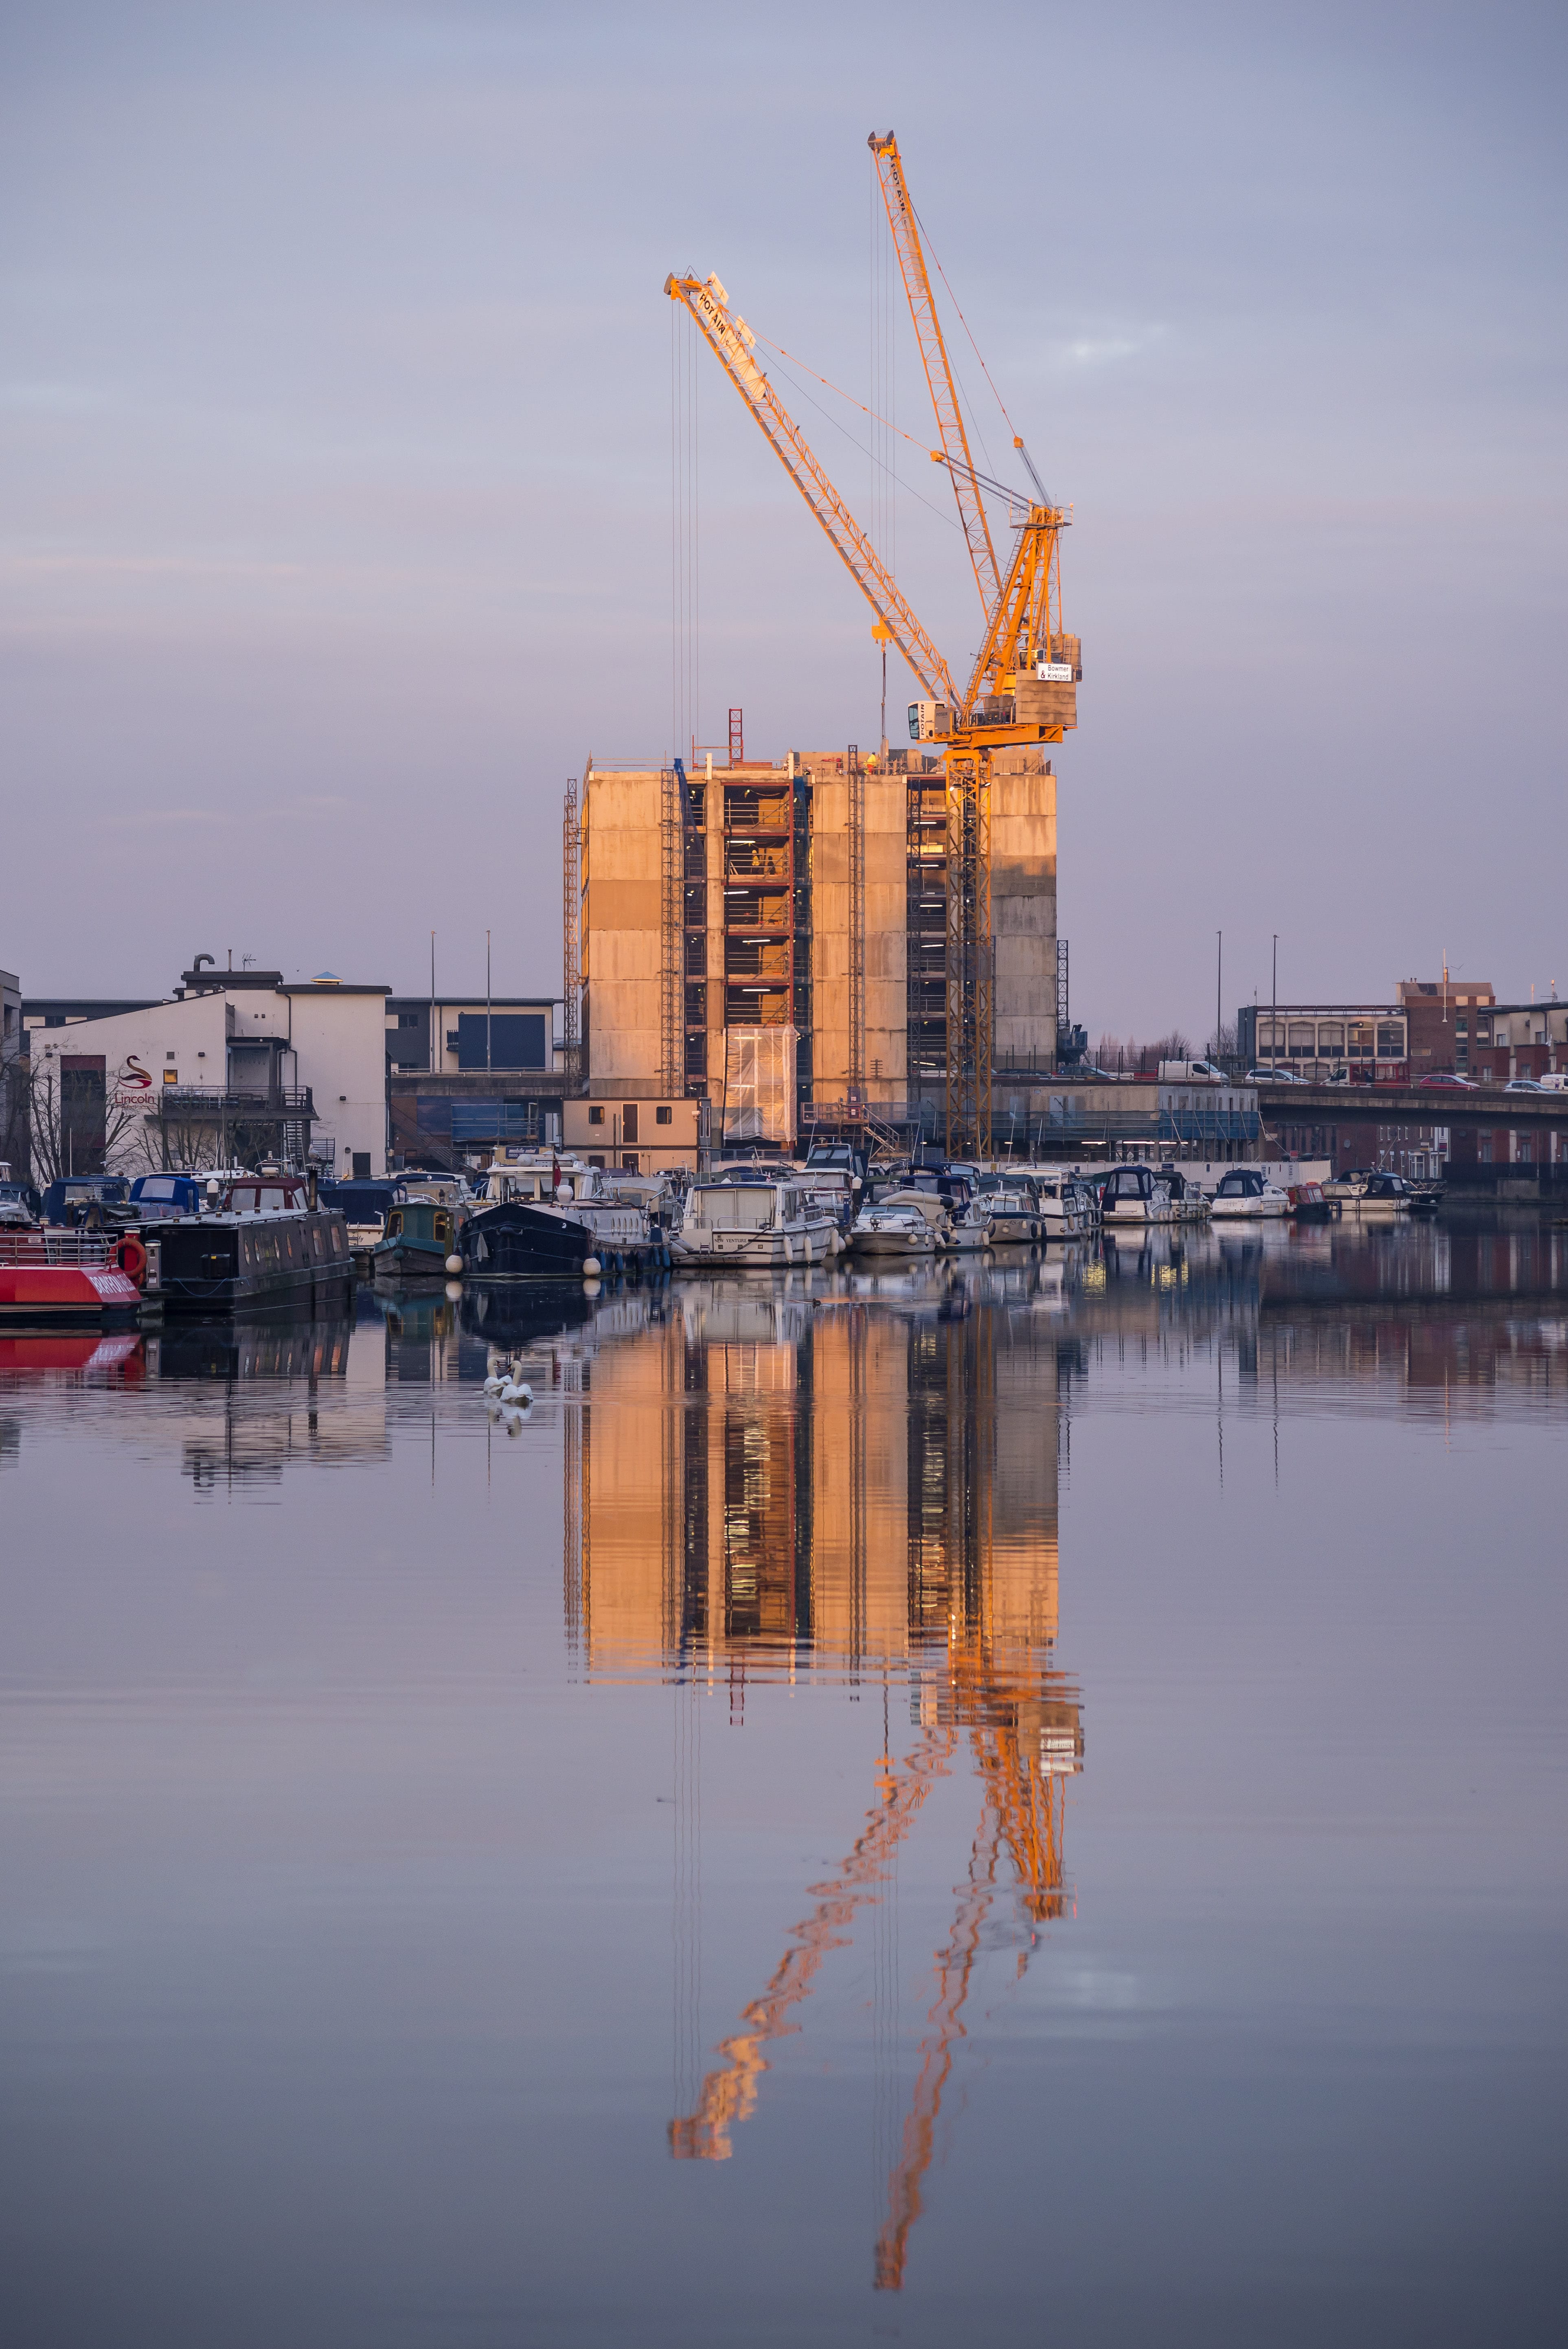 Image of an accommodation block being built by the water, a crane towers above it.